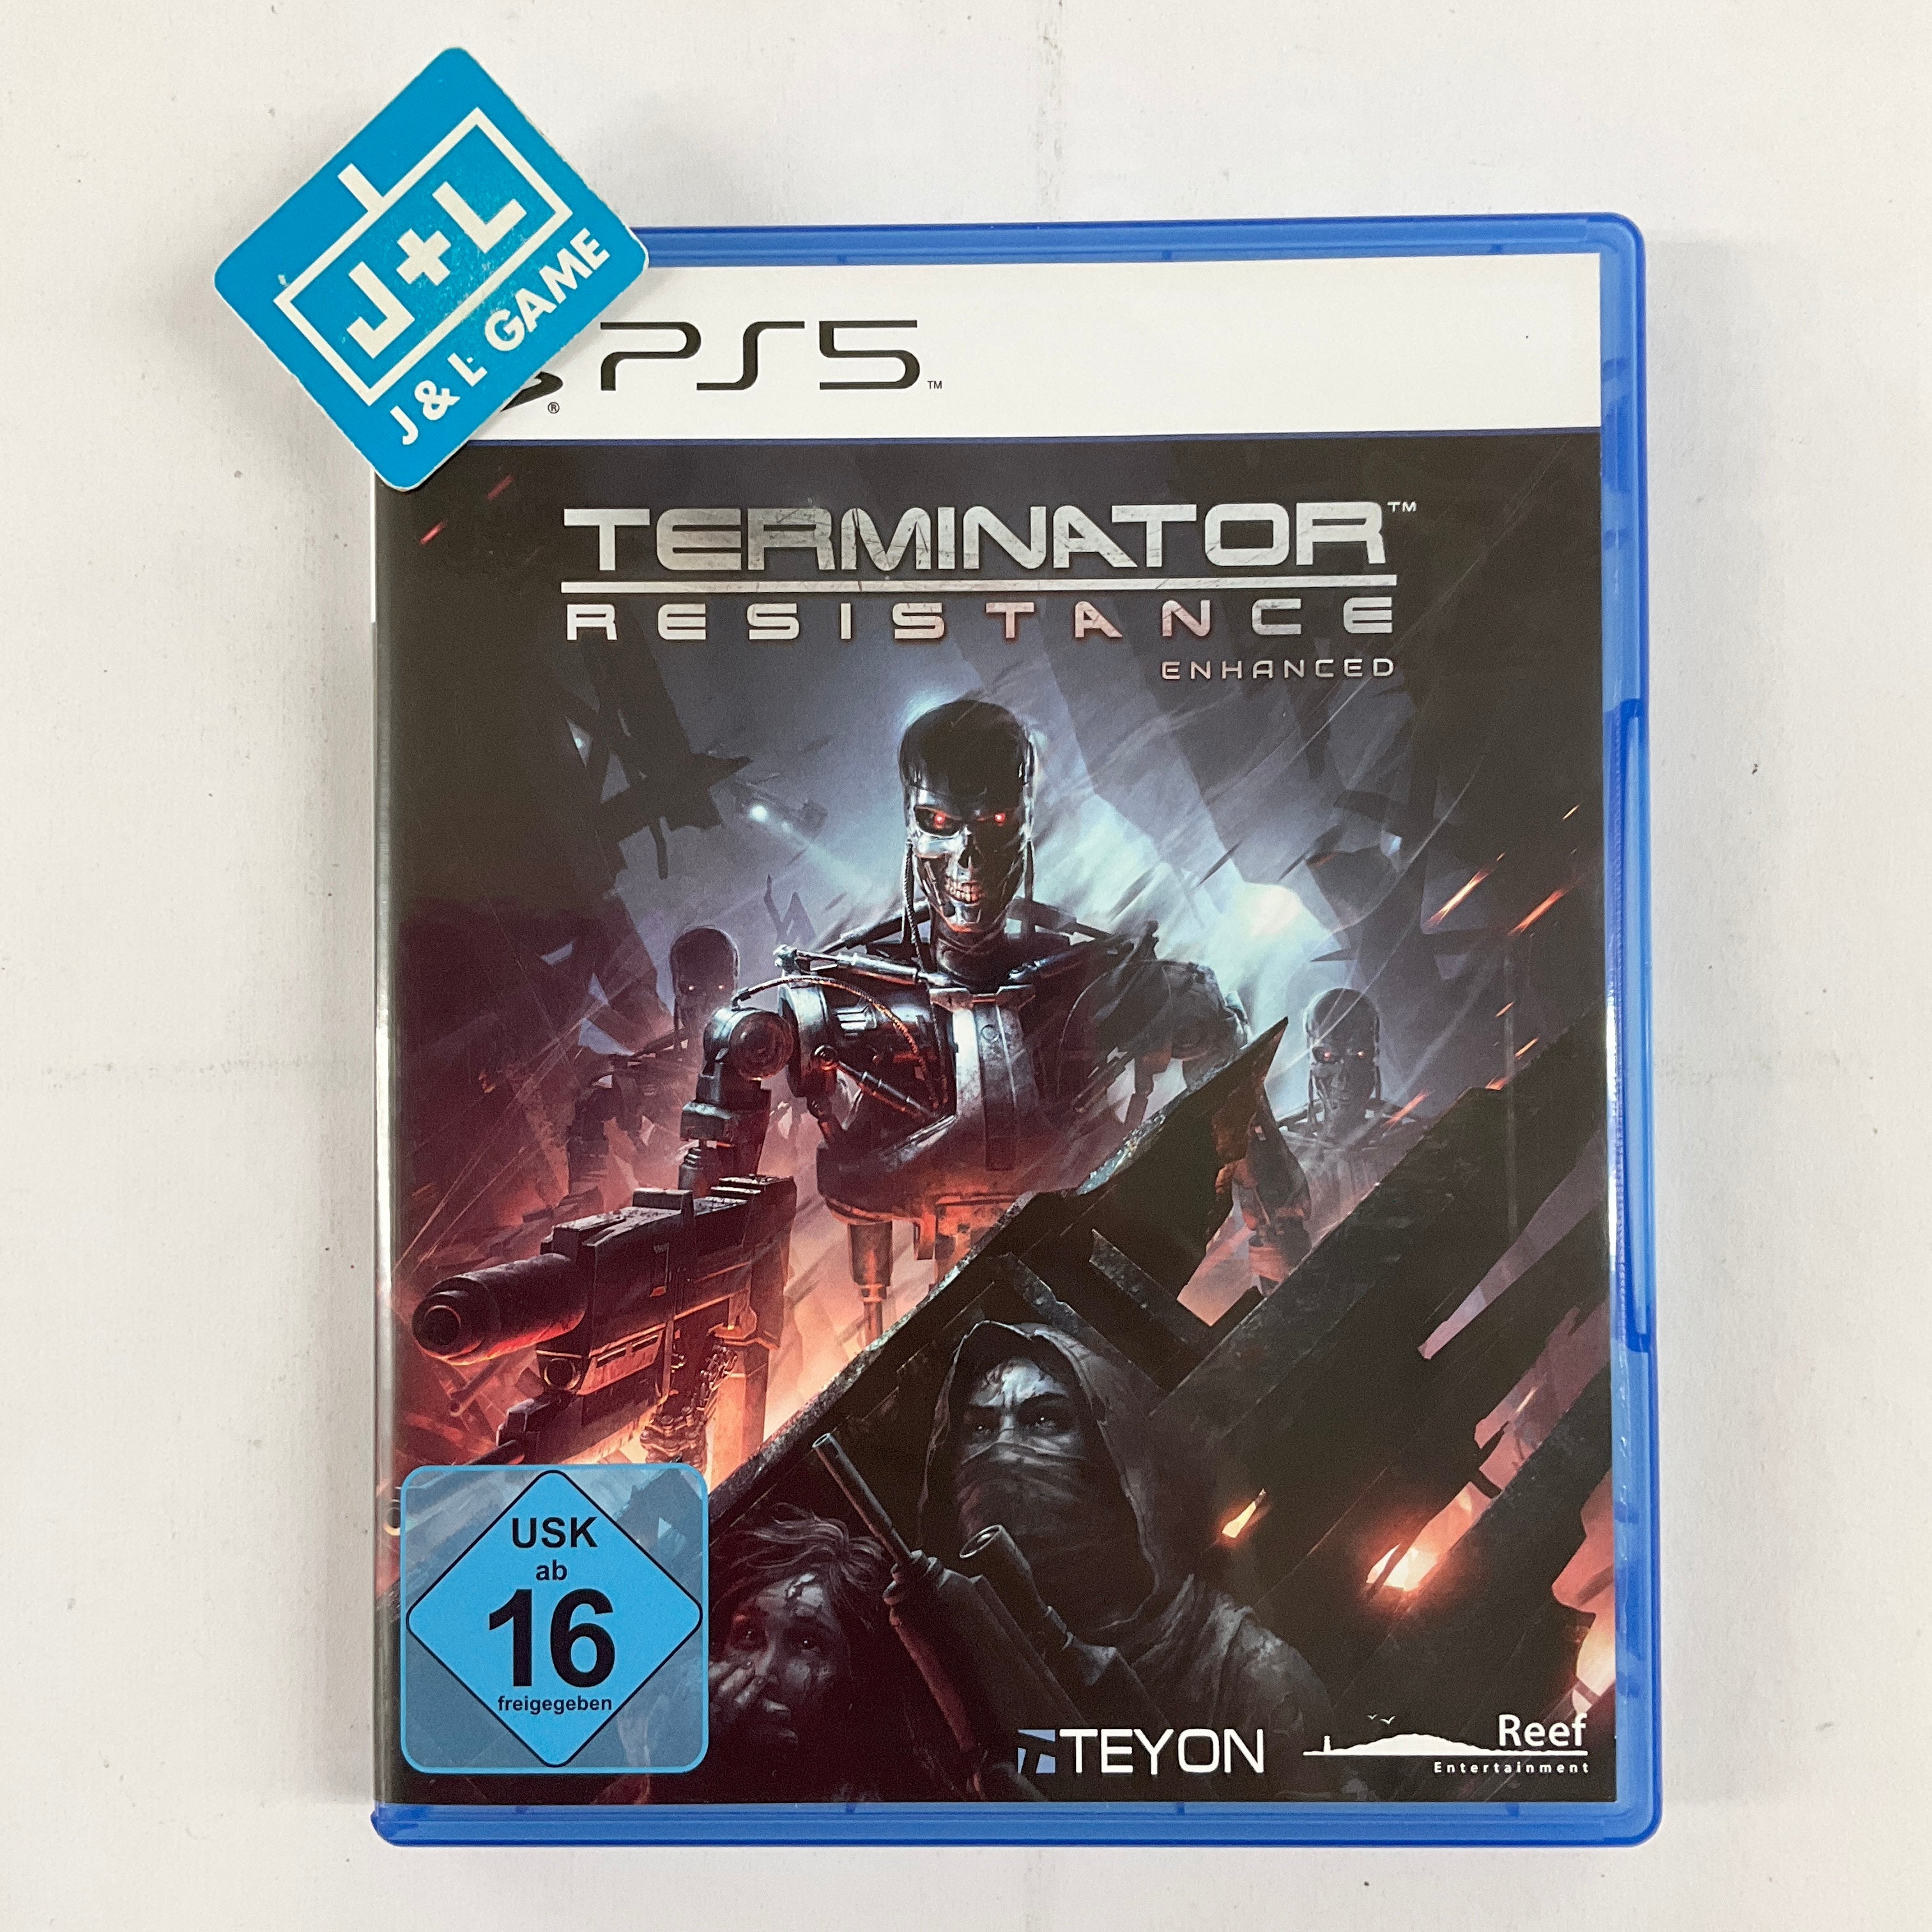 Terminator Resistance - (PS5) PlayStation 5 (European Import) [UNBOXING] Software Reef Entertainment   